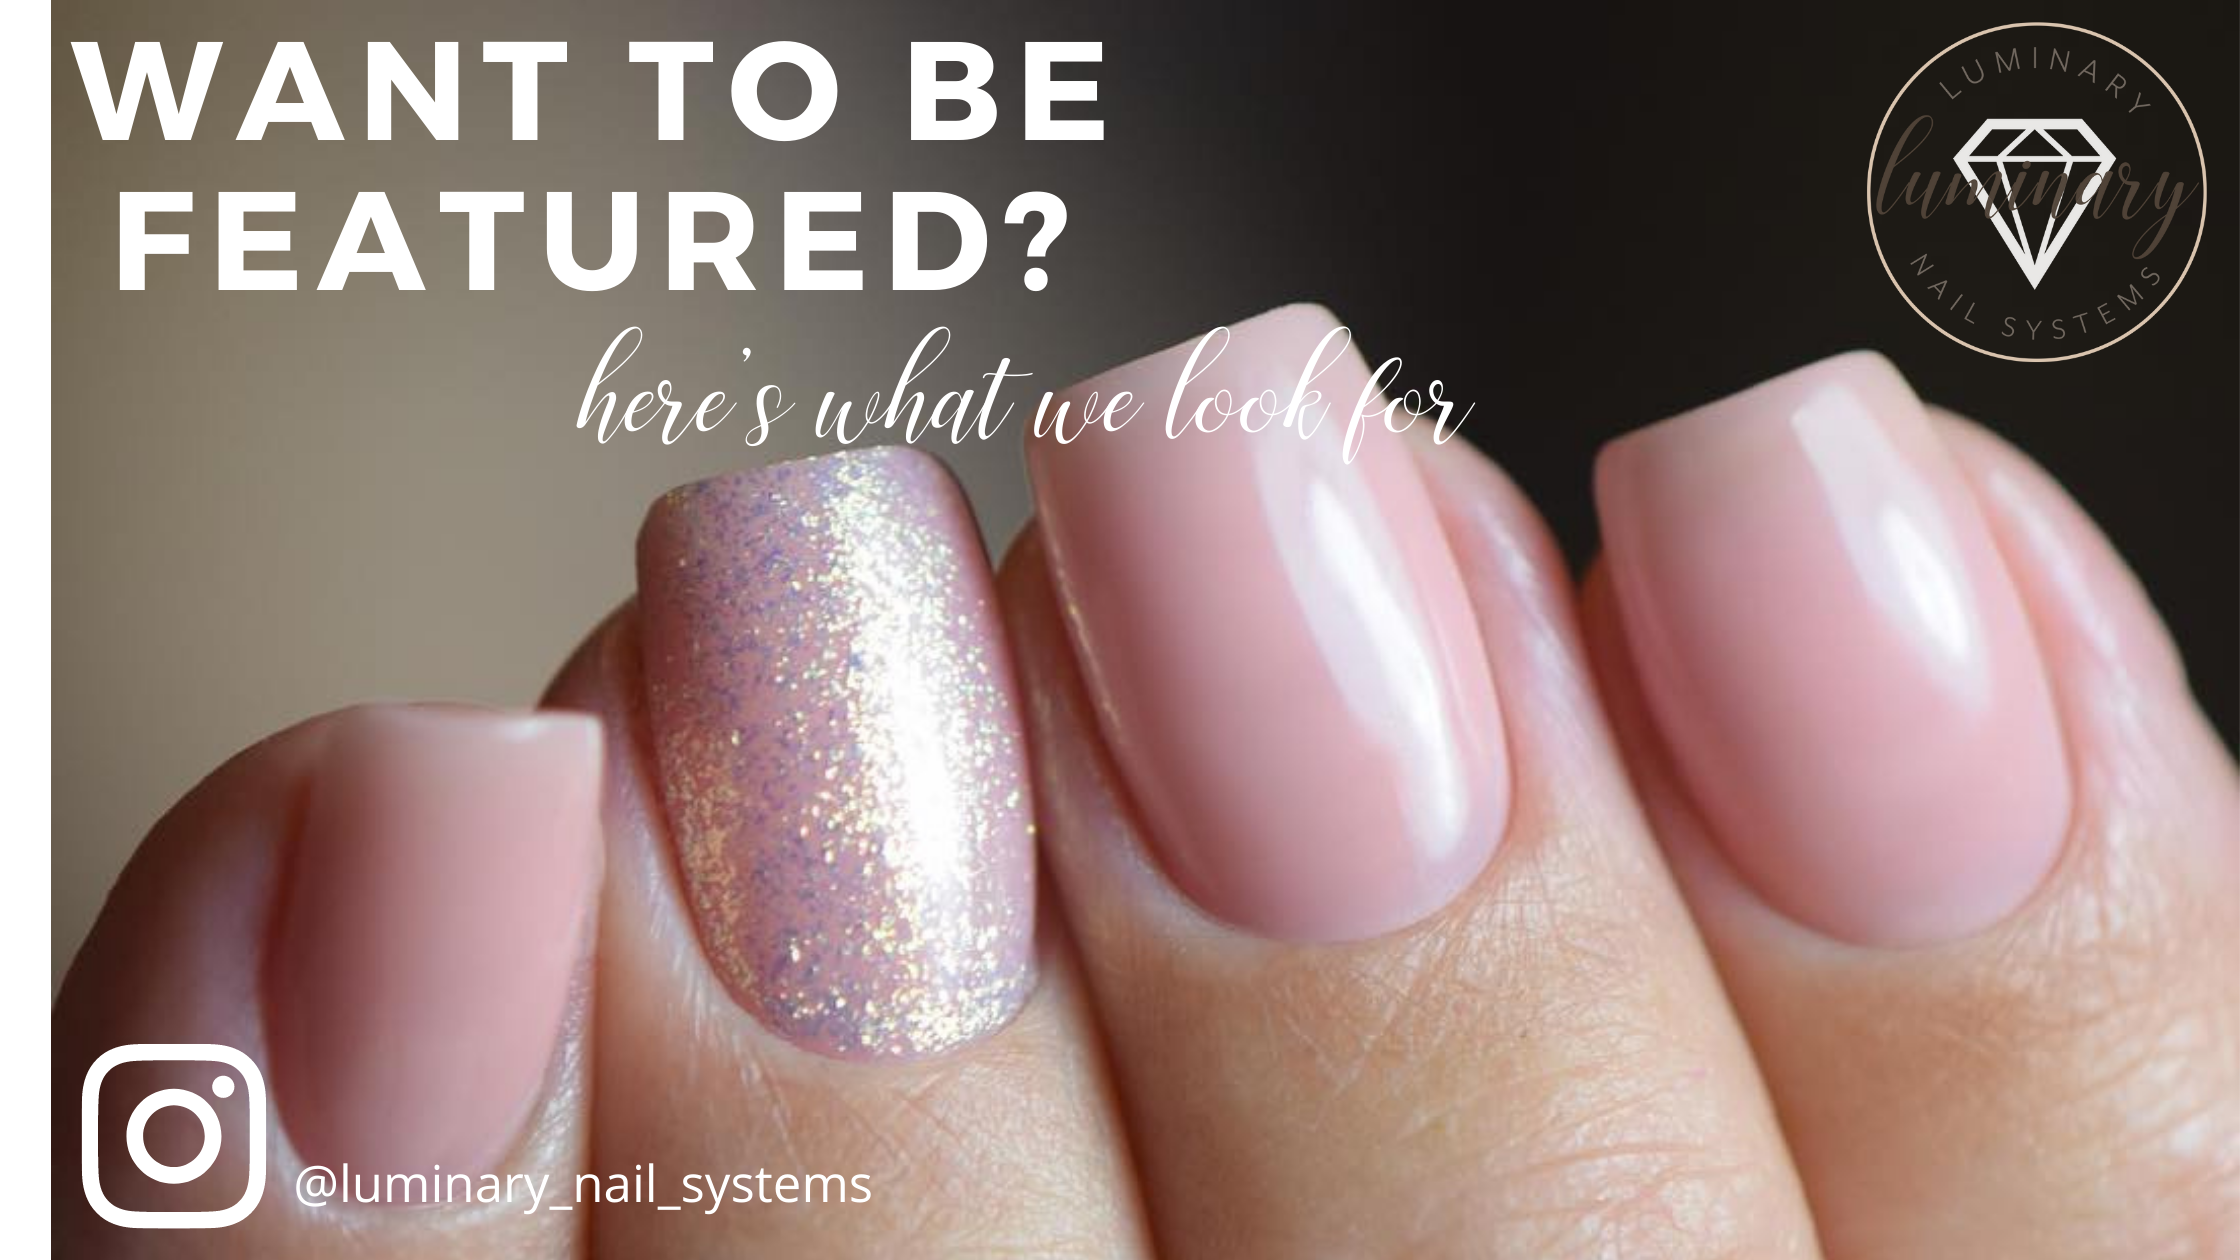 TOP TIPS: Nailing Instagram! - Nails by Mets